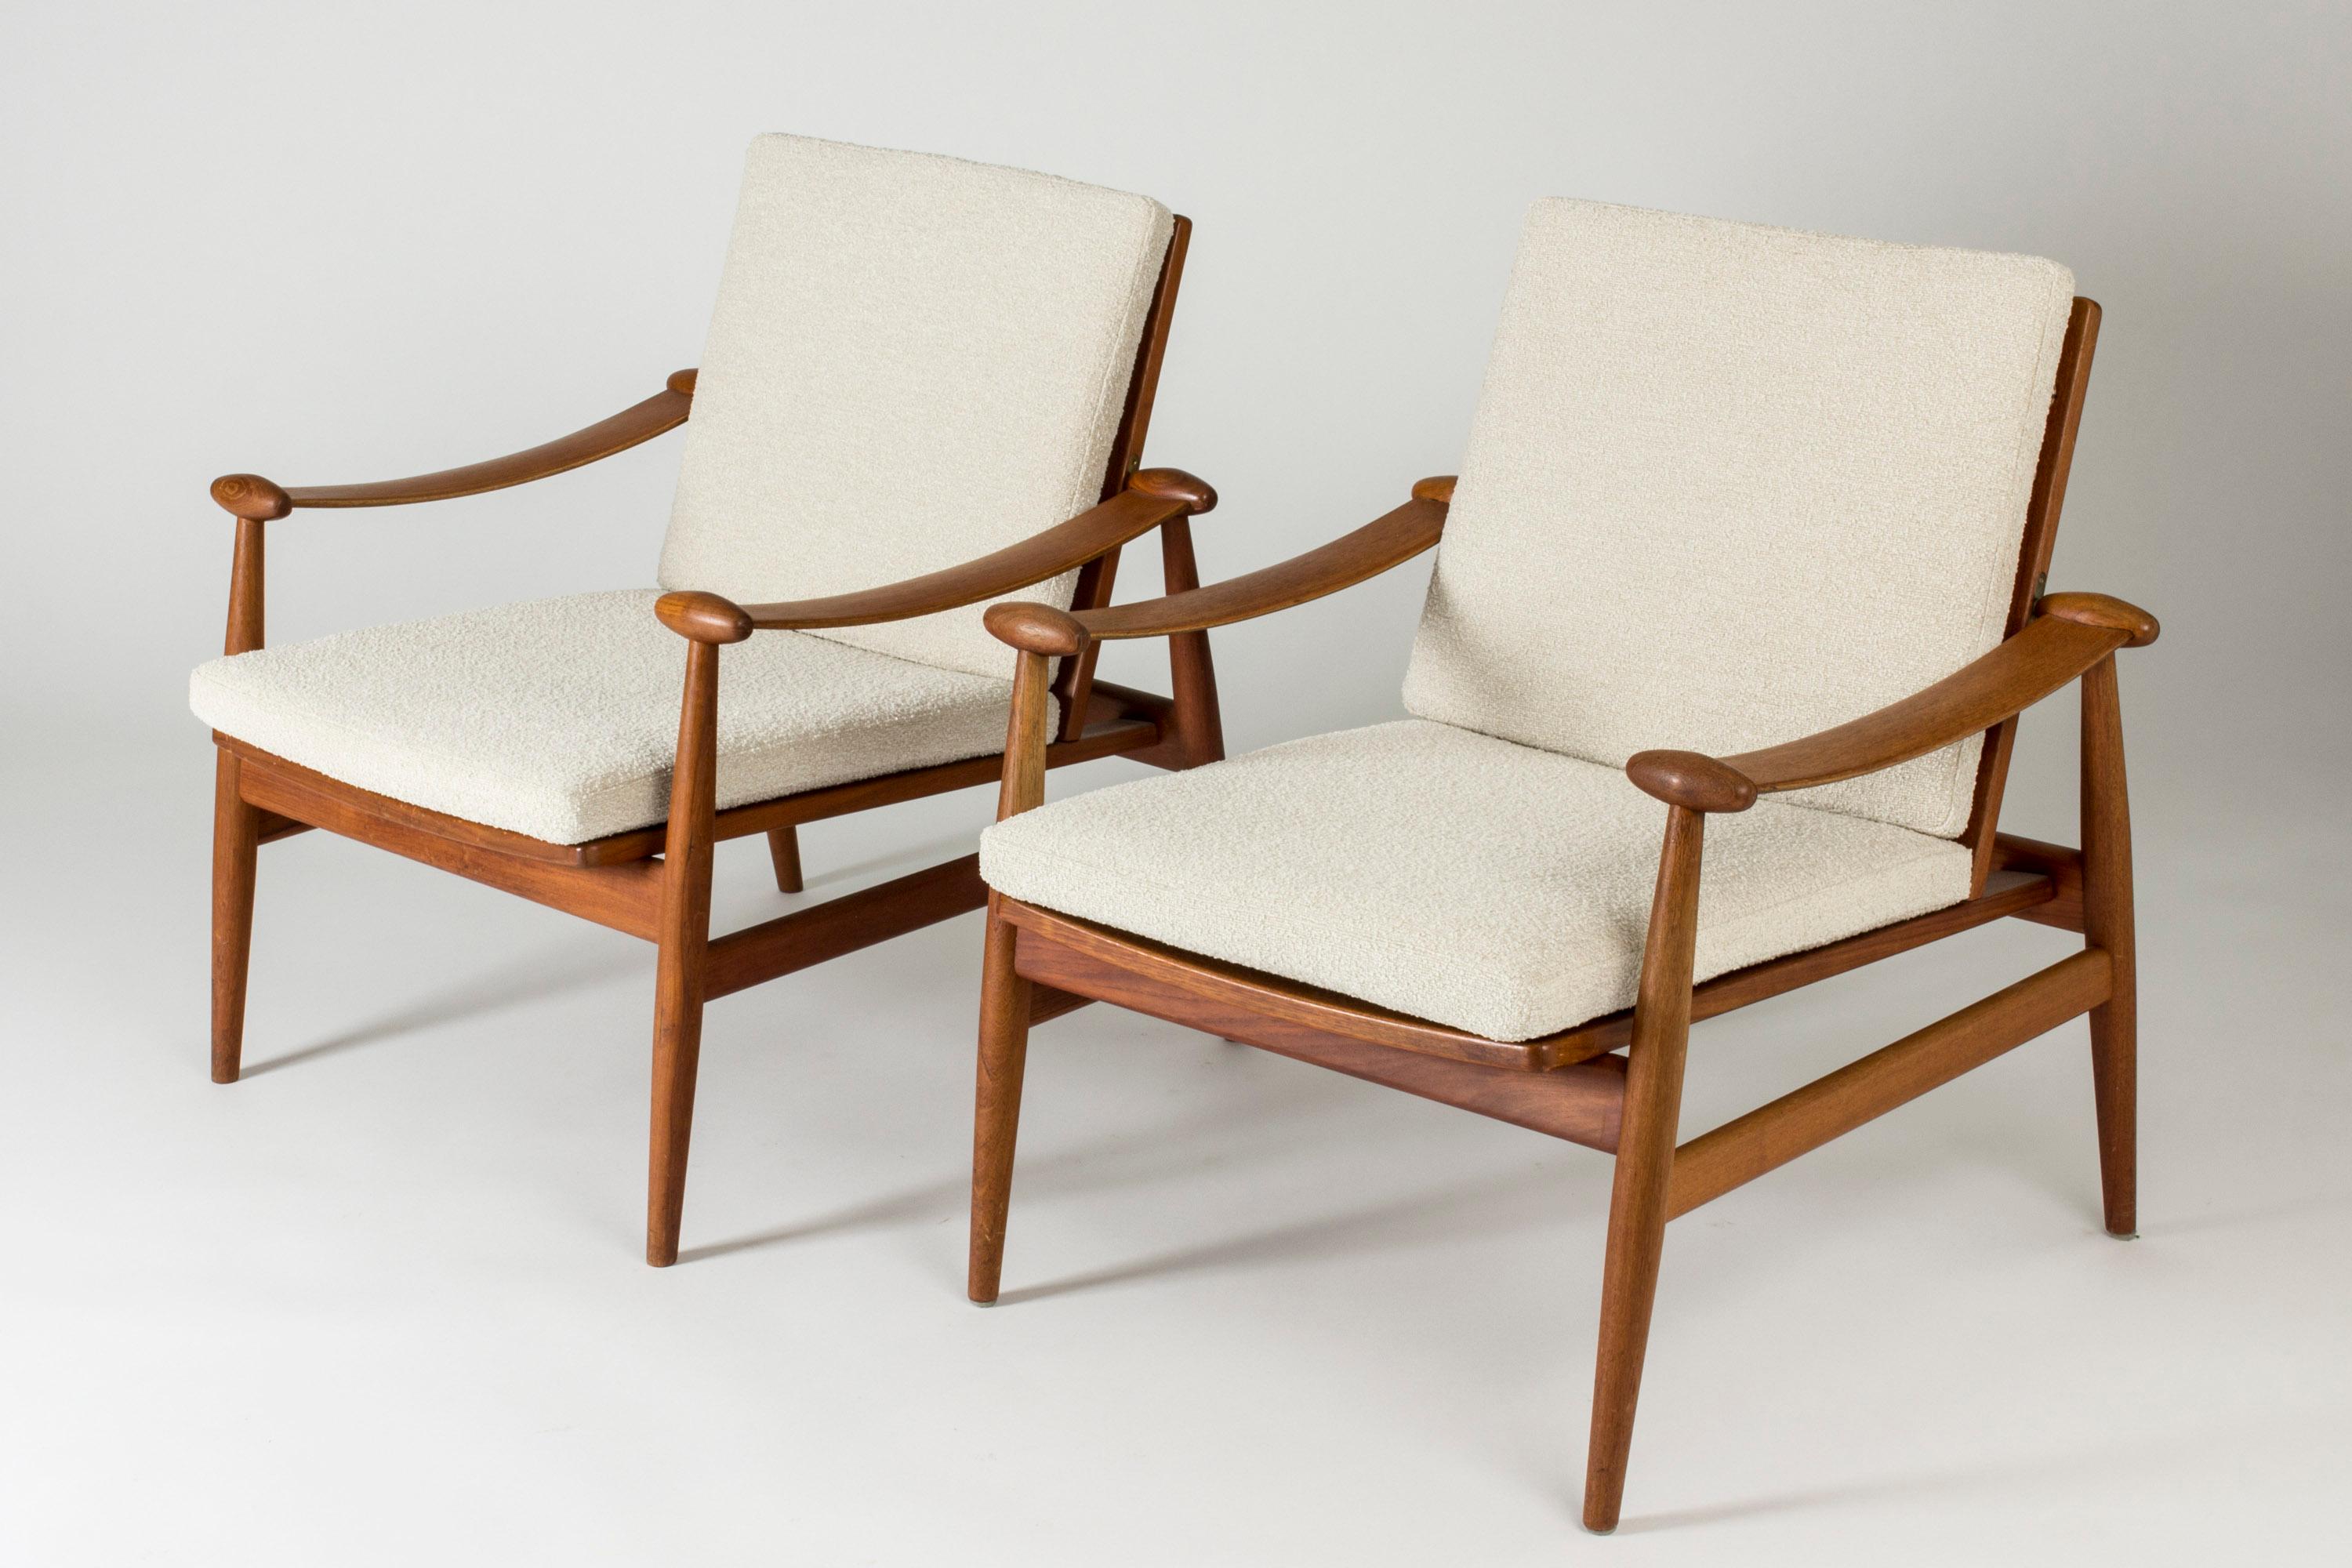 Pair of beautiful “Spade” lounge chairs by Finn Juhl, model FD 133. Designed in 1954. Made of teak with flowing lines, cushions upholstered with bouclé fabric.